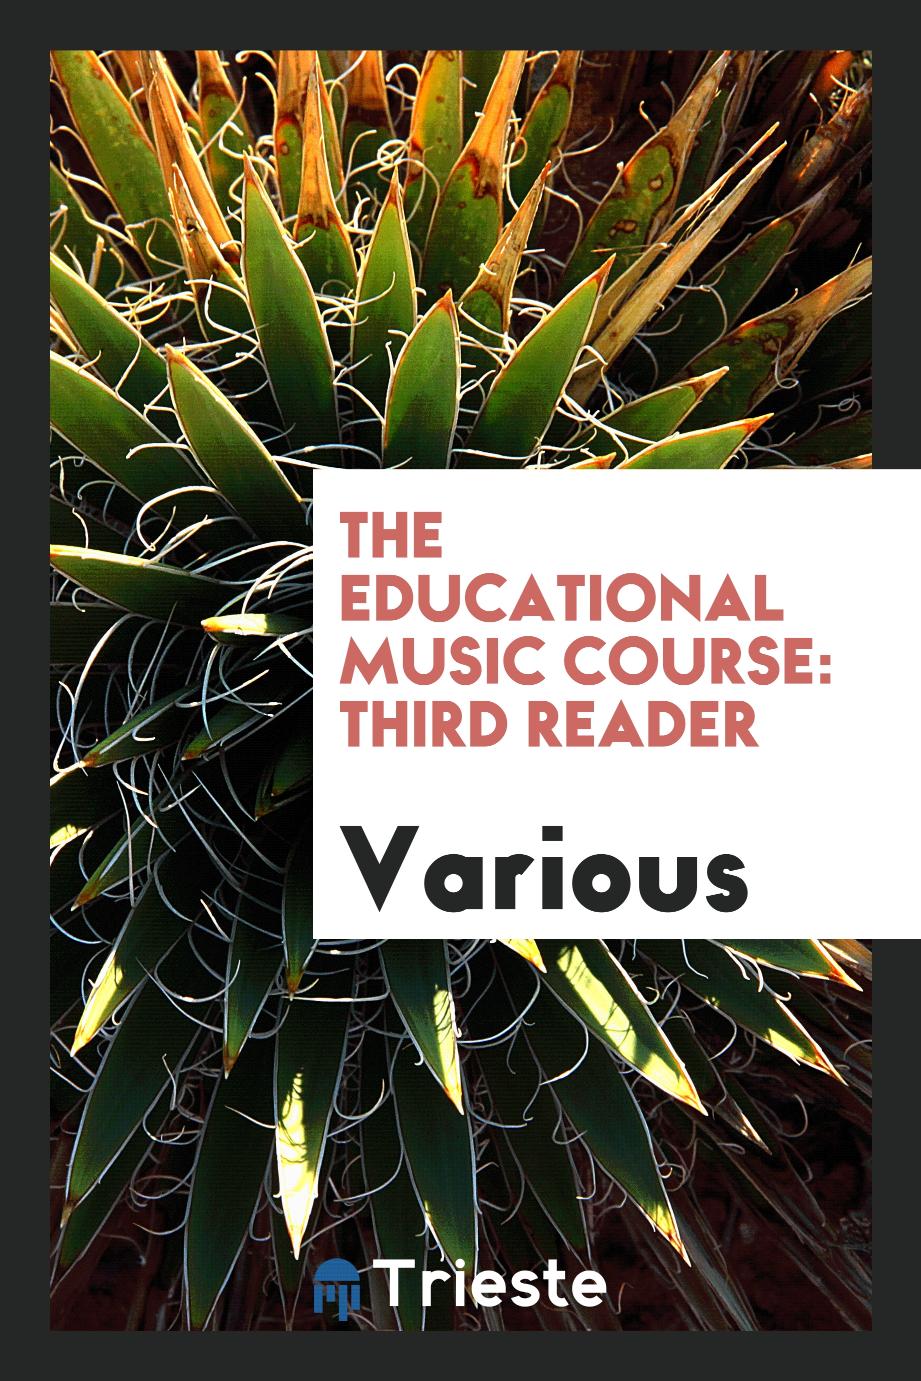 The Educational Music Course: Third Reader